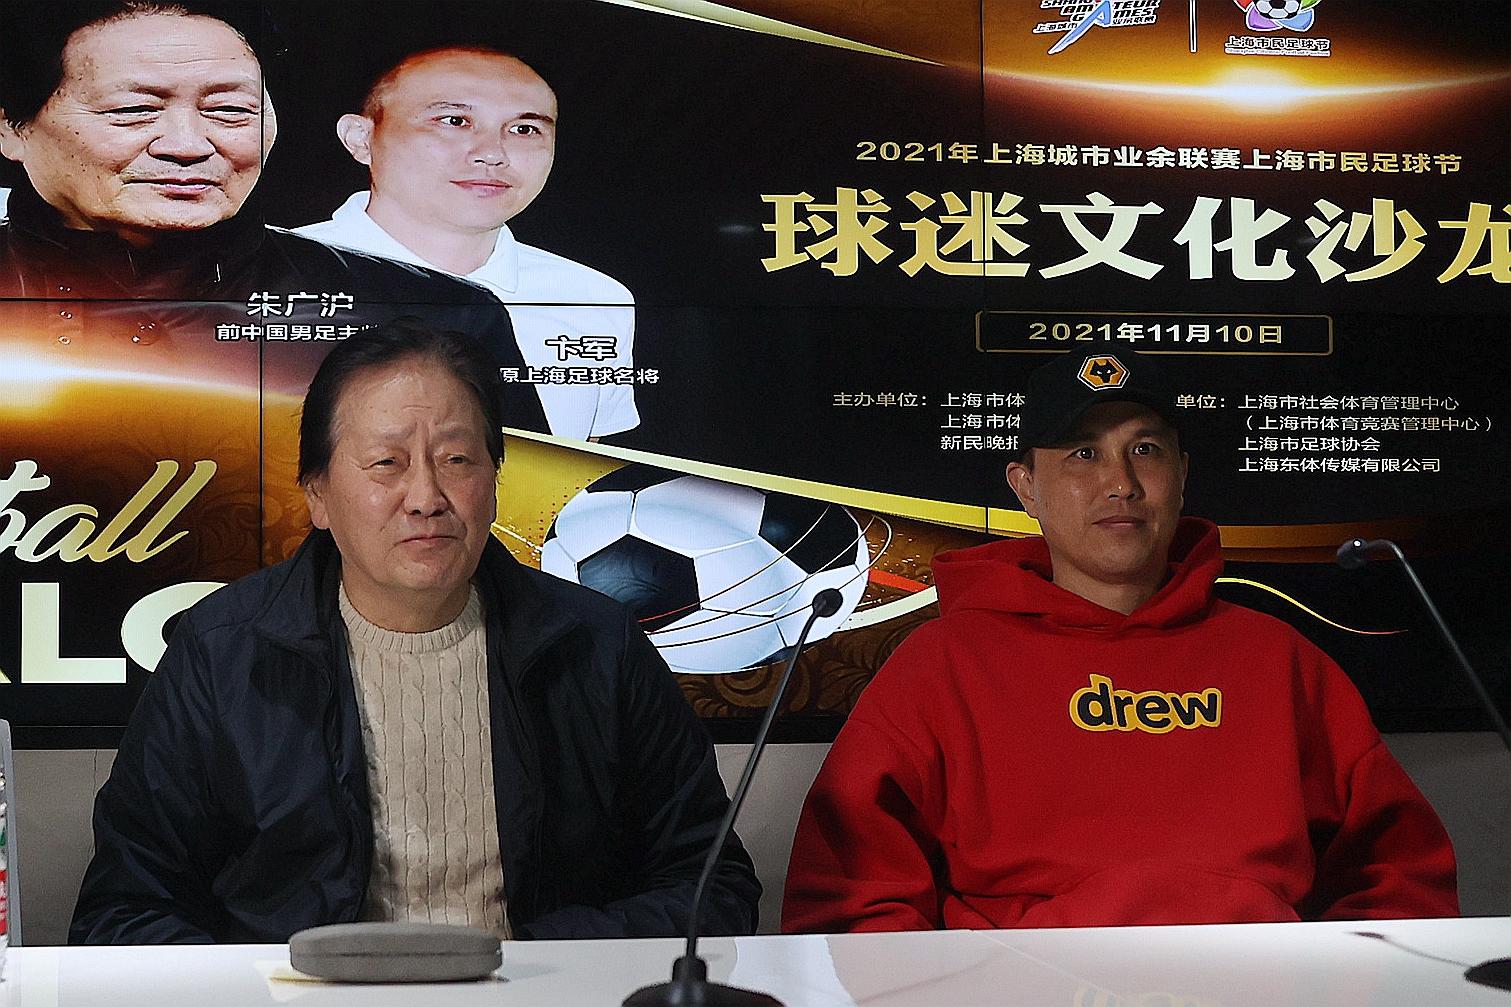 Former national football coach Zhu Guanghu (left) participated in the fan forum according to IC photo